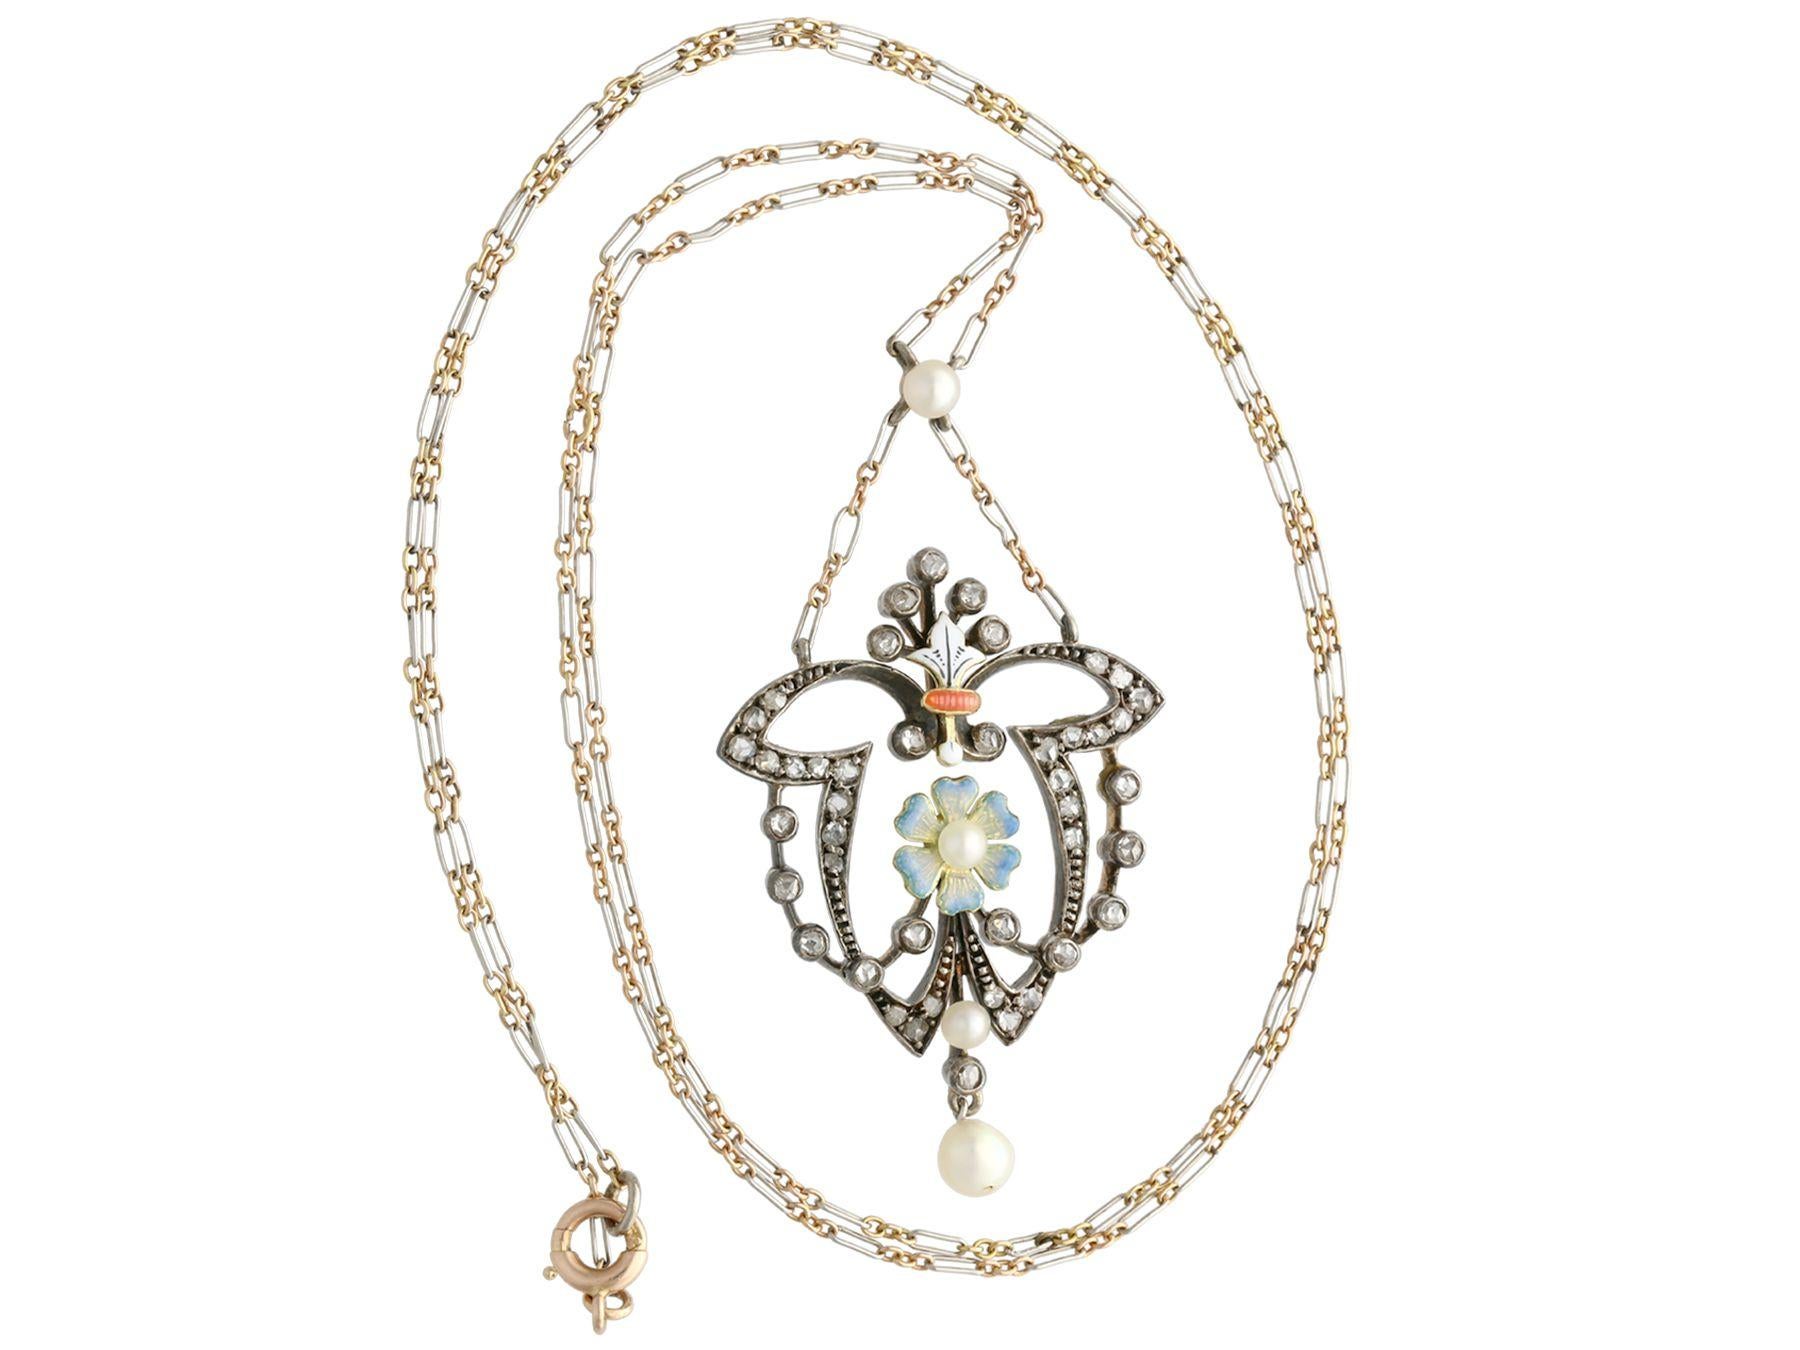 A stunning antique Victorian 0.55 carat diamond, pearl and enamel, 12 karat yellow gold and silver set necklace; part of our diverse antique jewelry and estate jewelry collections.

This stunning, fine and impressive antique antique pendant has been